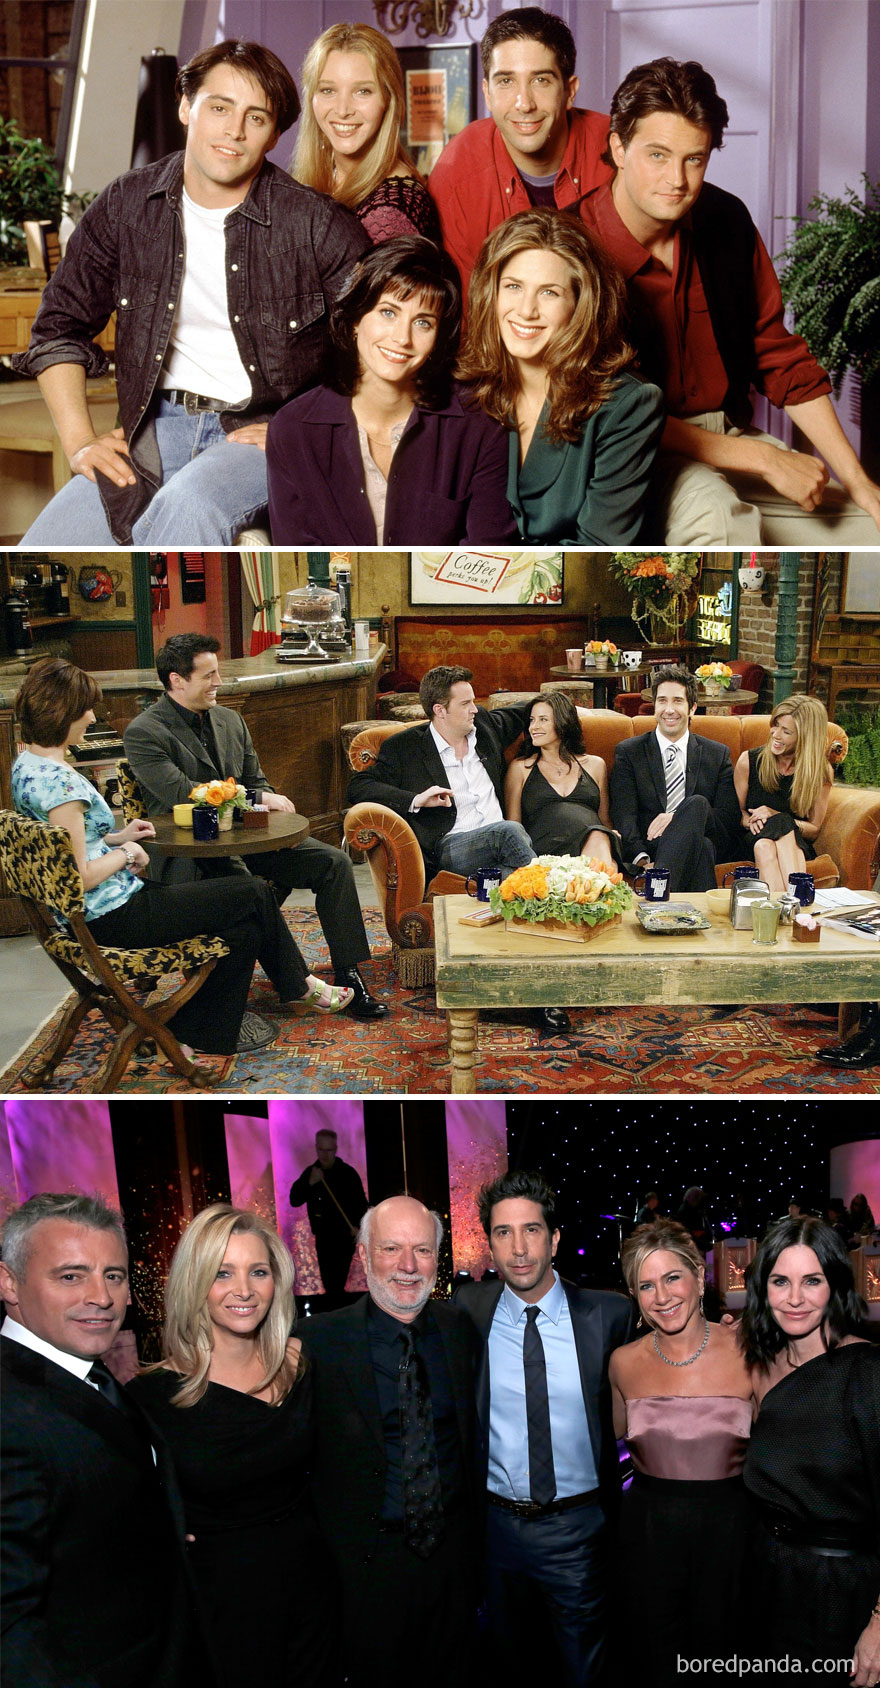 famous-tv-show-movie-reunions-2-5891bf297b568__880